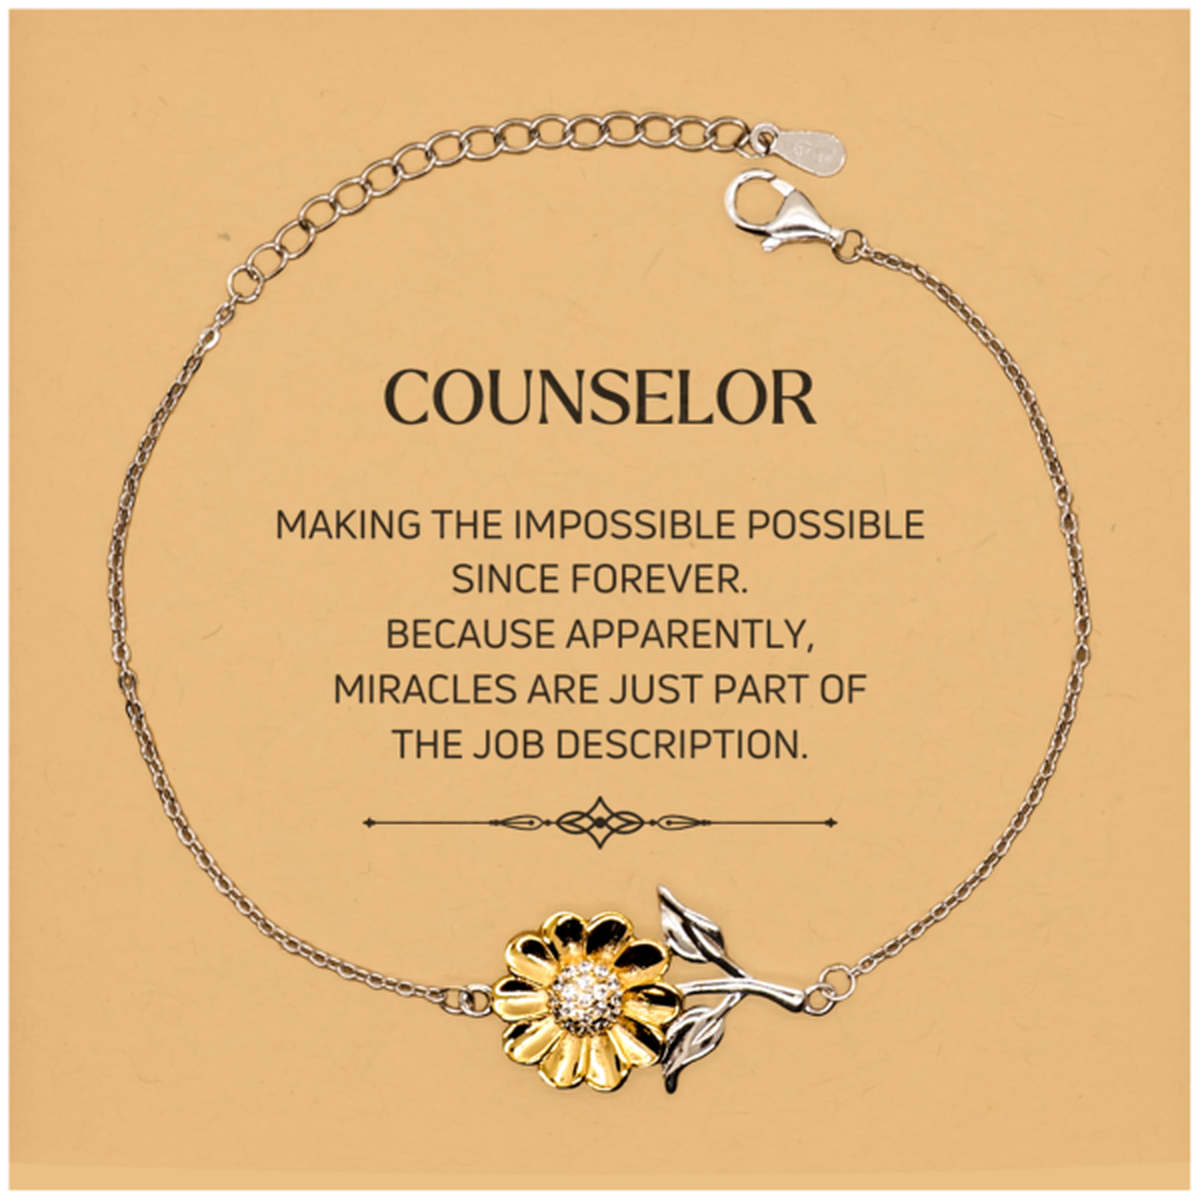 Funny Counselor Gifts, Miracles are just part of the job description, Inspirational Birthday Christmas Sunflower Bracelet For Counselor, Men, Women, Coworkers, Friends, Boss